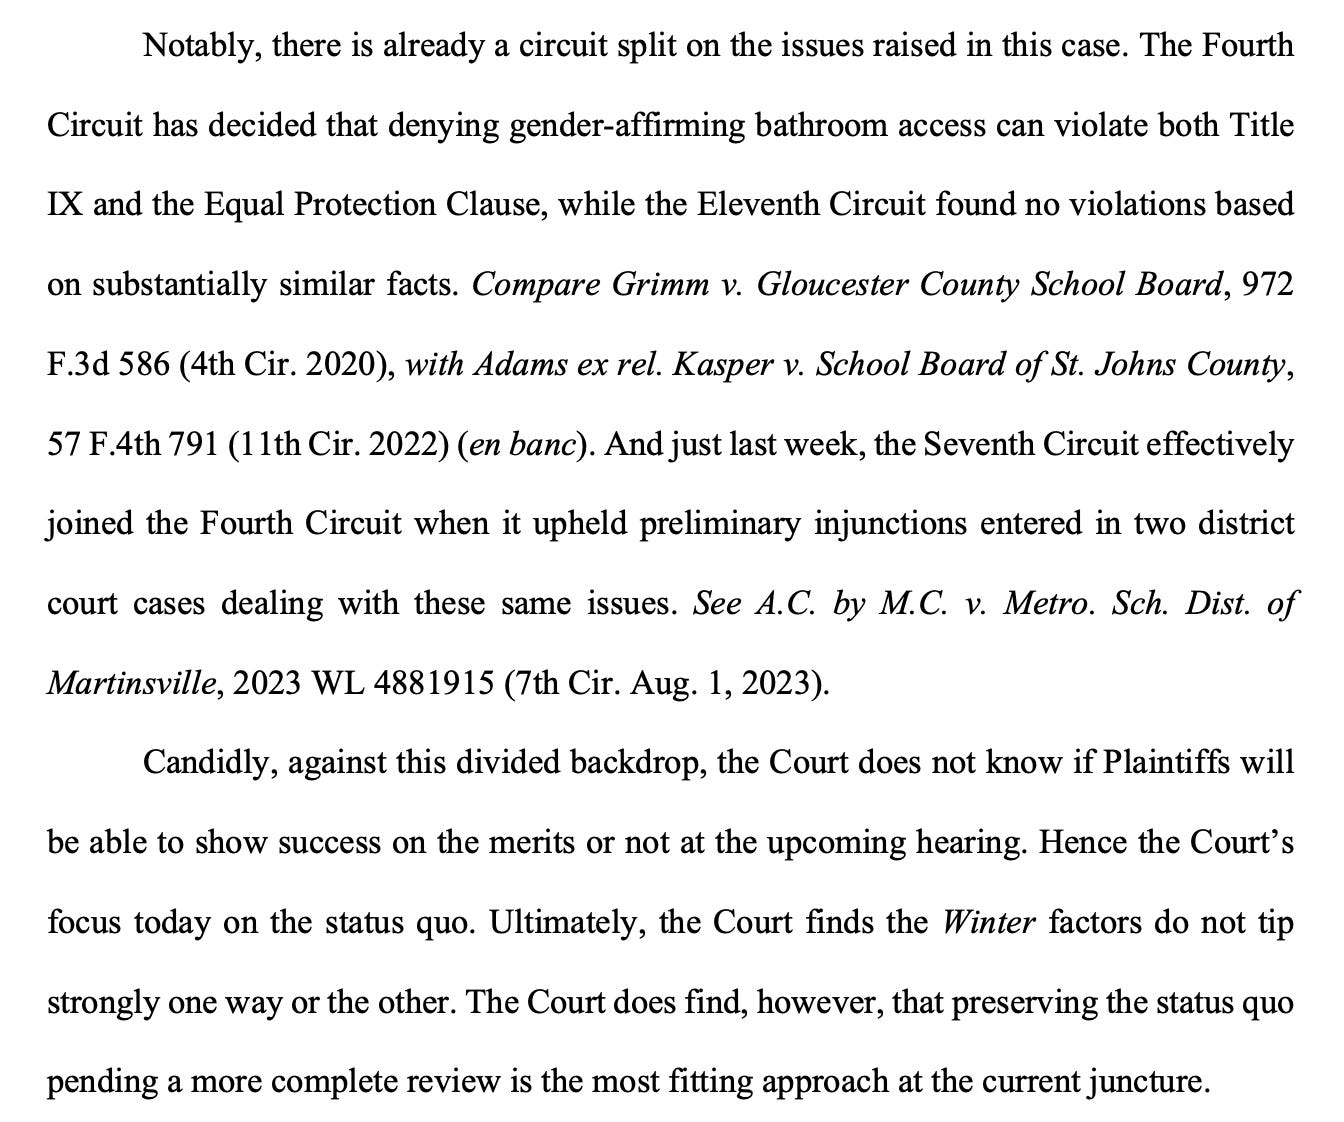 Notably, there is already a circuit split on the issues raised in this case. The Fourth Circuit has decided that denying gender-affirming bathroom access can violate both Title IX and the Equal Protection Clause, while the Eleventh Circuit found no violations based on substantially similar facts. Compare Grimm v. Gloucester County School Board, 972 F.3d 586 (4th Cir. 2020), with Adams ex rel. Kasper v. School Board of St. Johns County, 57 F.4th 791 (11th Cir. 2022) (en banc). And just last week, the Seventh Circuit effectively joined the Fourth Circuit when it upheld preliminary injunctions entered in two district court cases dealing with these same issues. See A.C. by M.C. v. Metro. Sch. Dist. of Martinsville, 2023 WL 4881915 (7th Cir. Aug. 1, 2023). Candidly, against this divided backdrop, the Court does not know if Plaintiffs will be able to show success on the merits or not at the upcoming hearing. Hence the Court’s focus today on the status quo. Ultimately, the Court finds the Winter factors do not tip strongly one way or the other. The Court does find, however, that preserving the status quo pending a more complete review is the most fitting approach at the current juncture. 